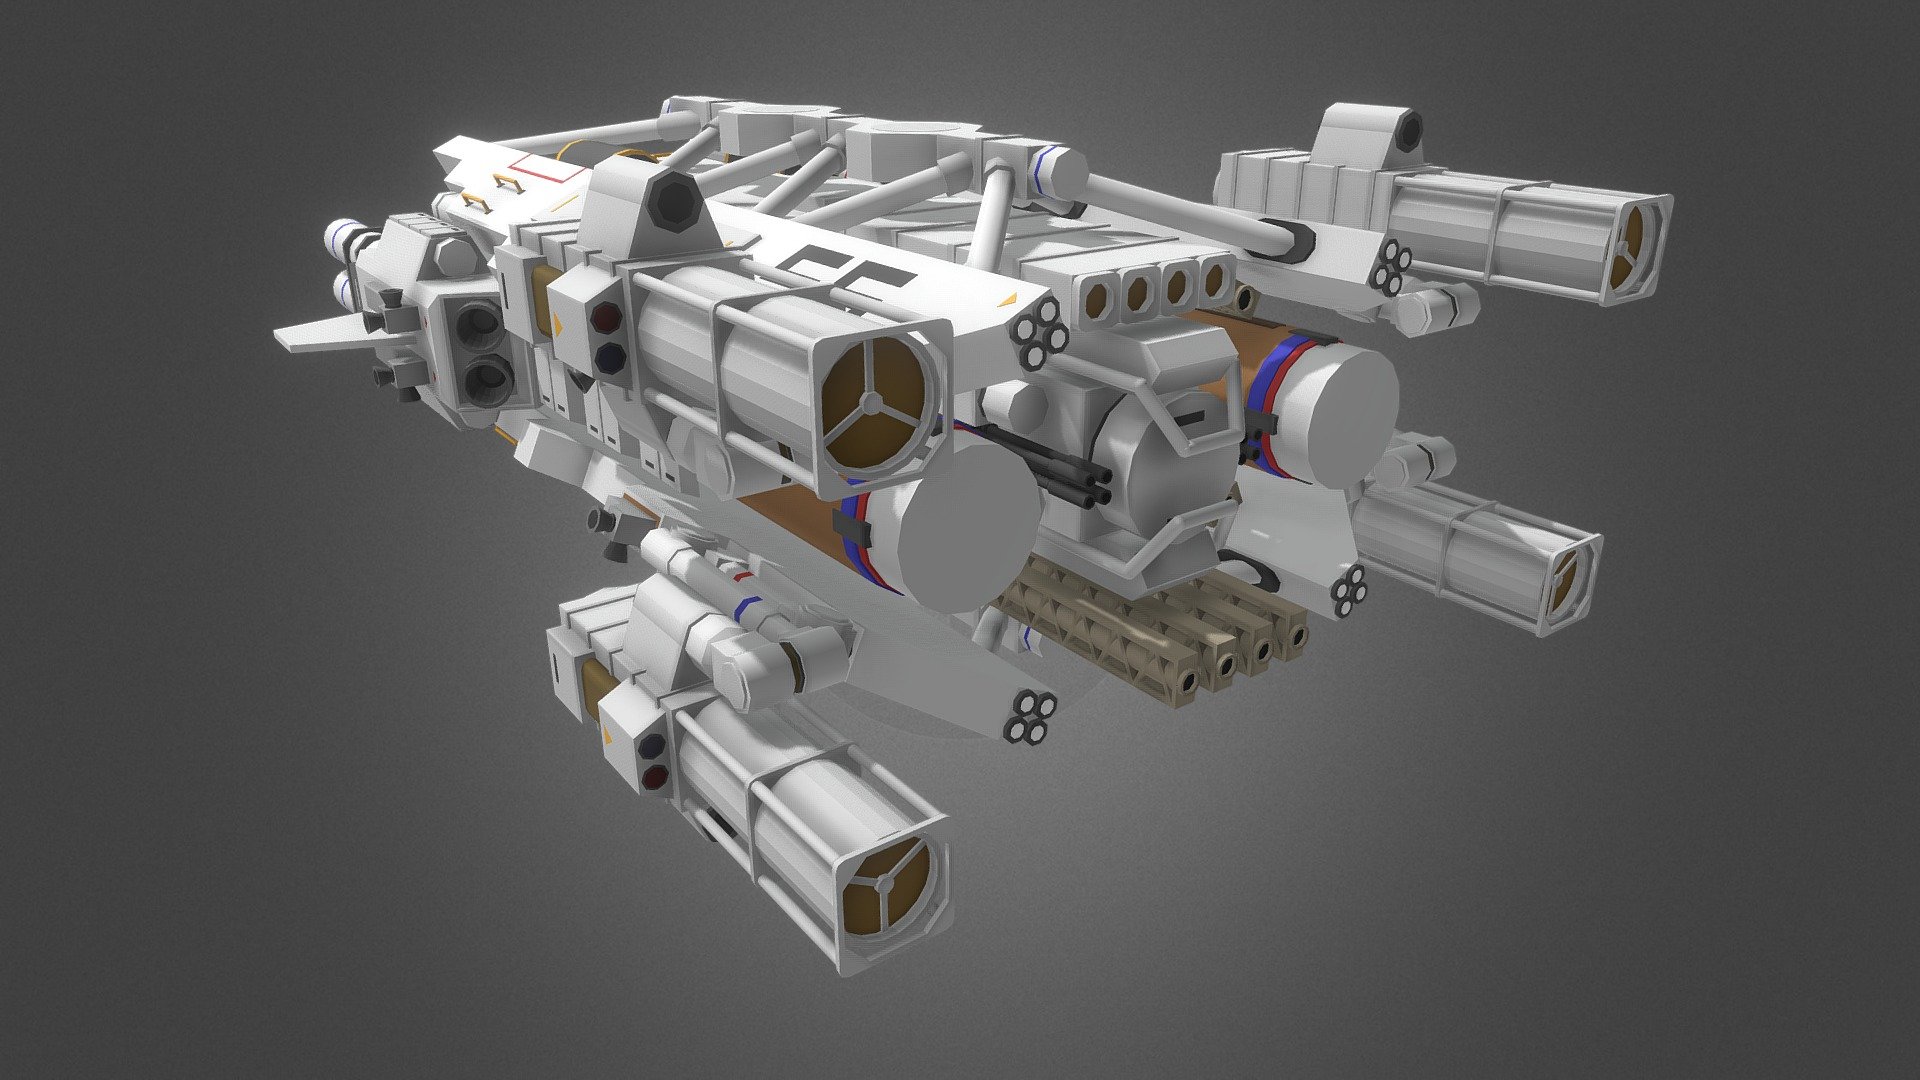 Sci-fi Space ship

A repurposed space-tug that now become a weapon platform.

Made in Machinecraft, Exported directly - Space Weapon Platform "Wizard" - 3D model by Rarare 3d model